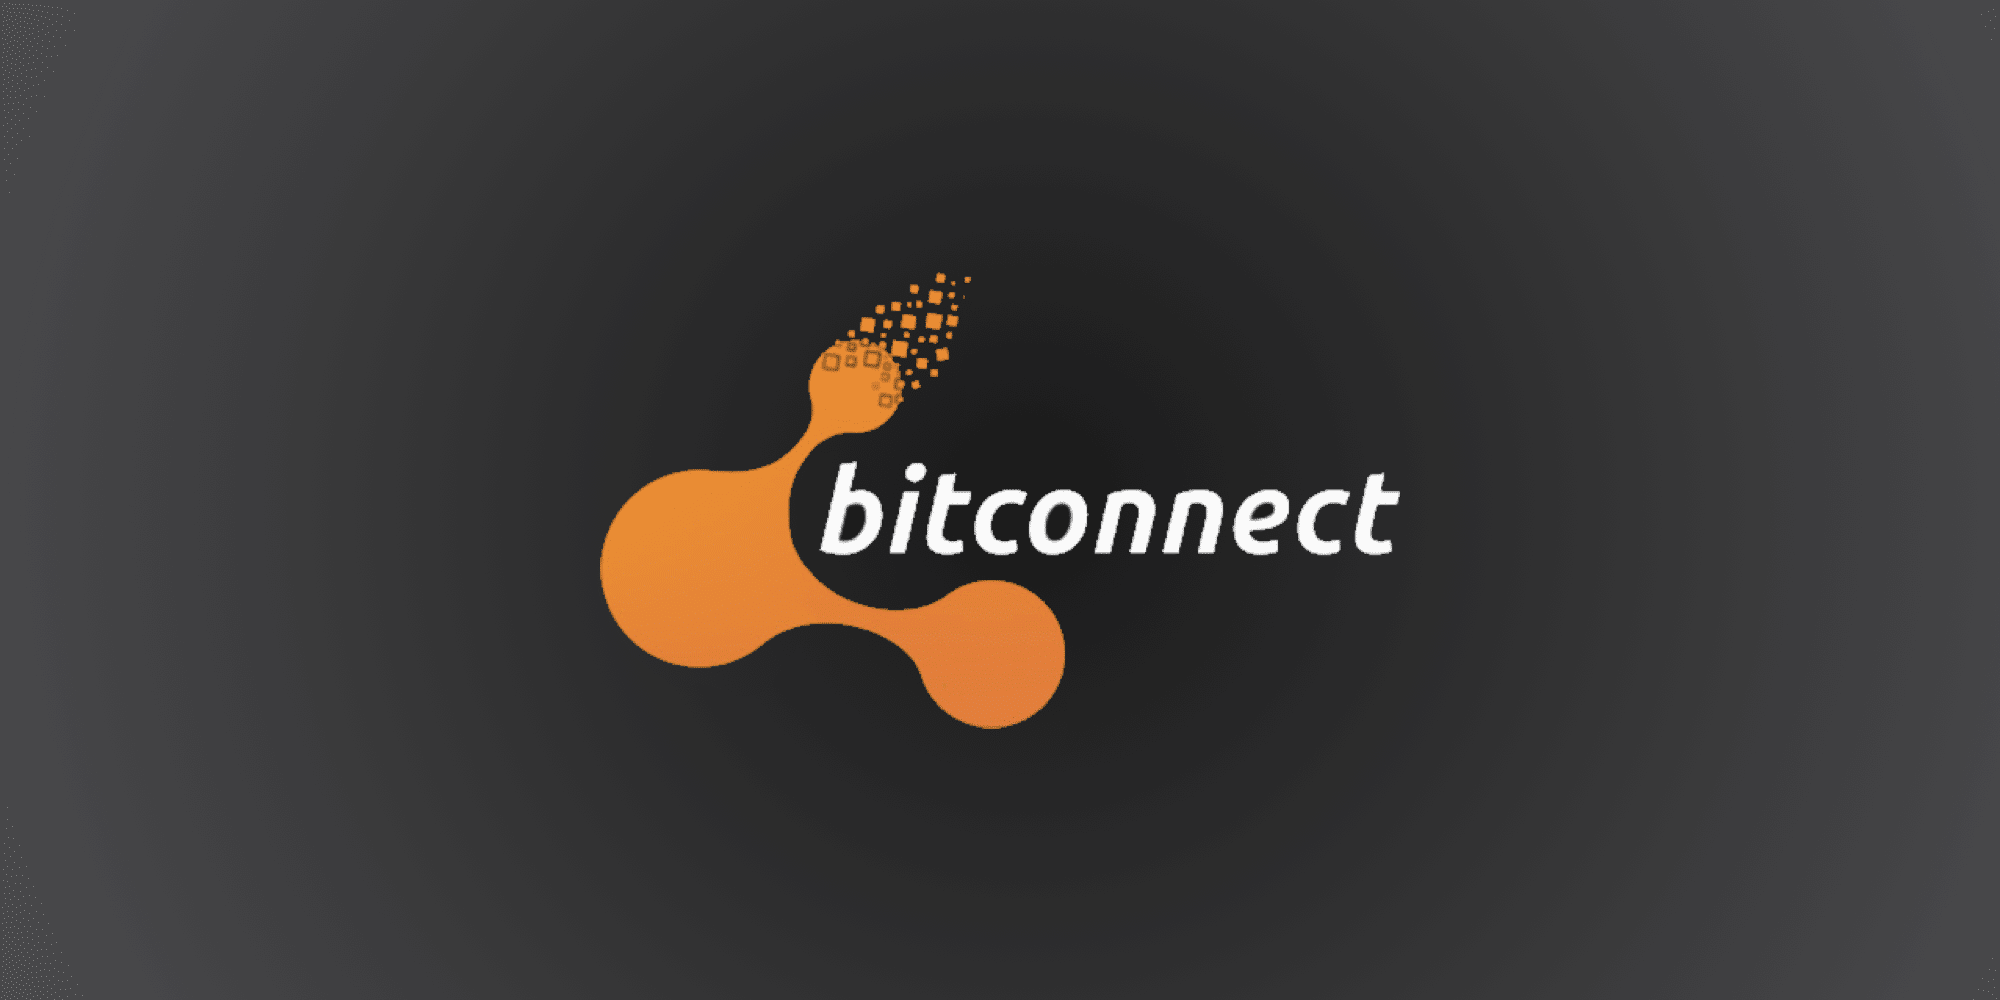 BitConnect Shutters Crypto Exchange Site After Regulator Warnings - CoinDesk